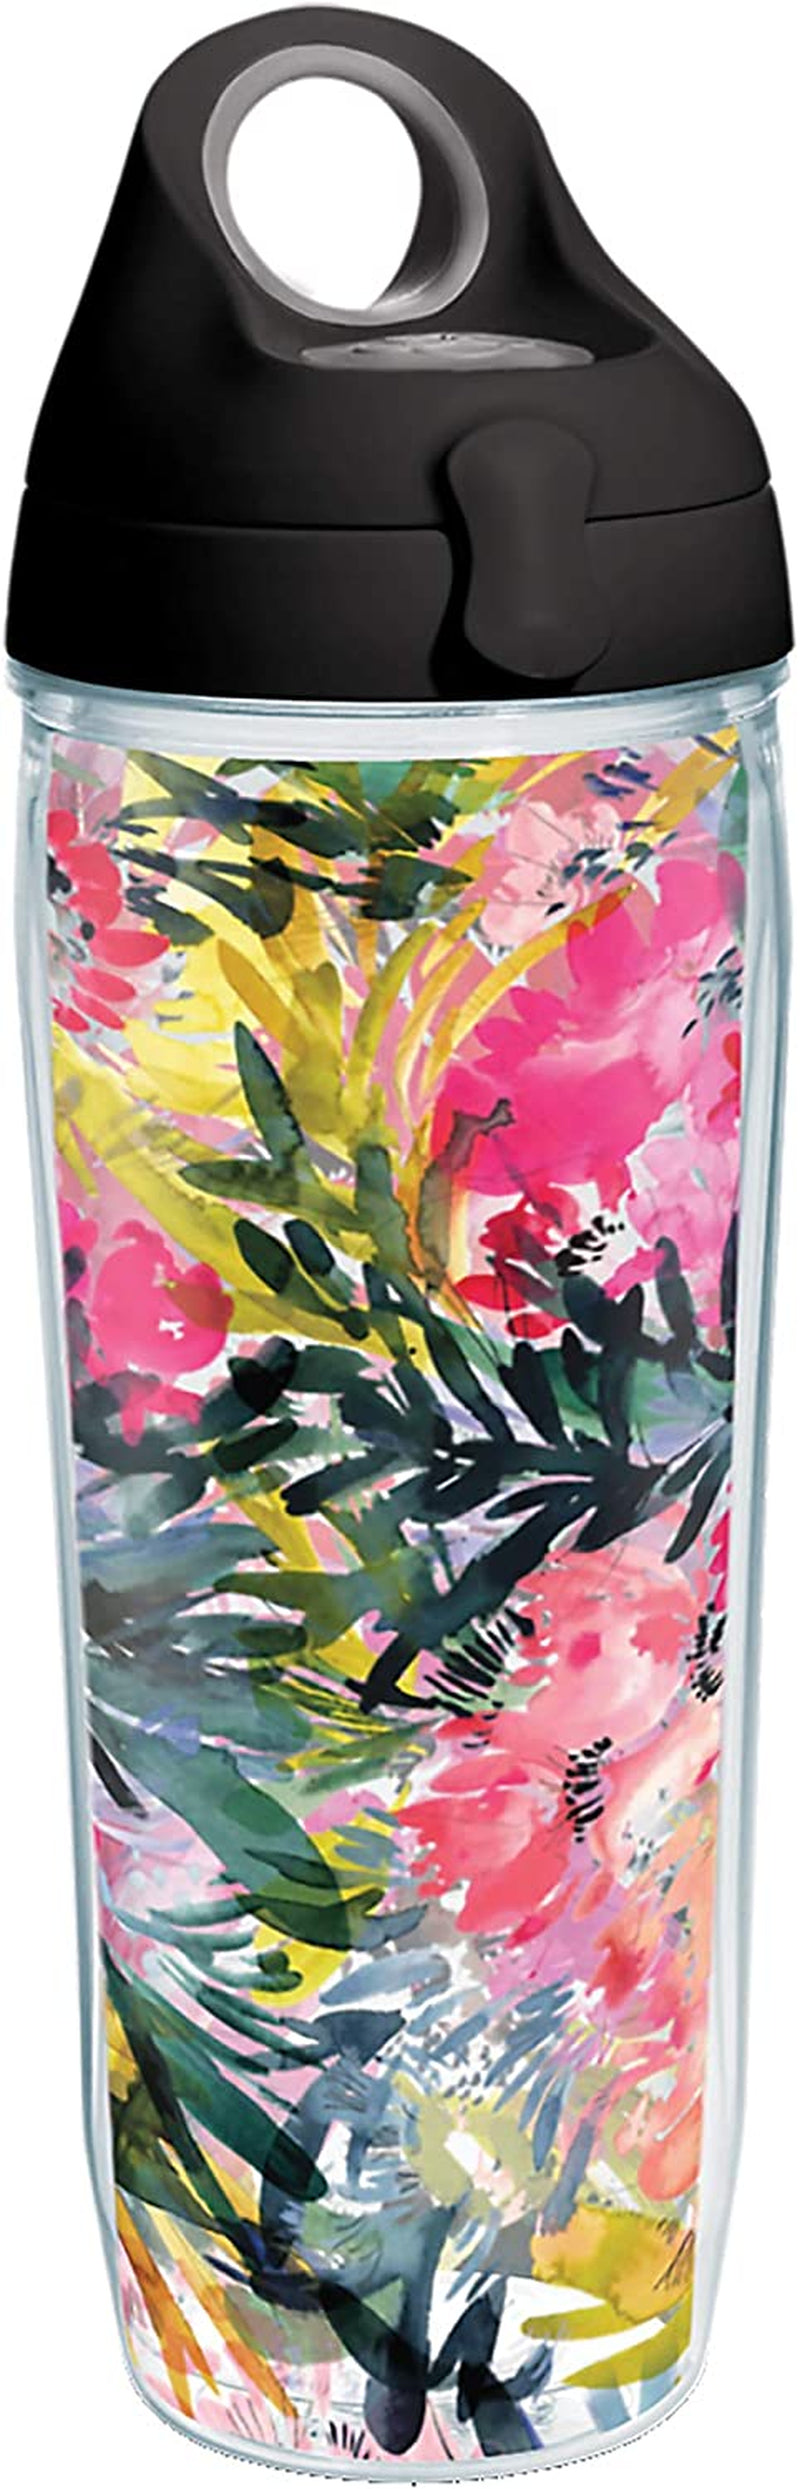 Tervis Made in USA Double Walled Kelly Ventura Floral Collection Insulated Tumbler Cup Keeps Drinks Cold & Hot, 16Oz 4Pk - Classic, Assorted Home & Garden > Kitchen & Dining > Tableware > Drinkware Tervis Perennial Garden 24oz Water Bottle - Classic 